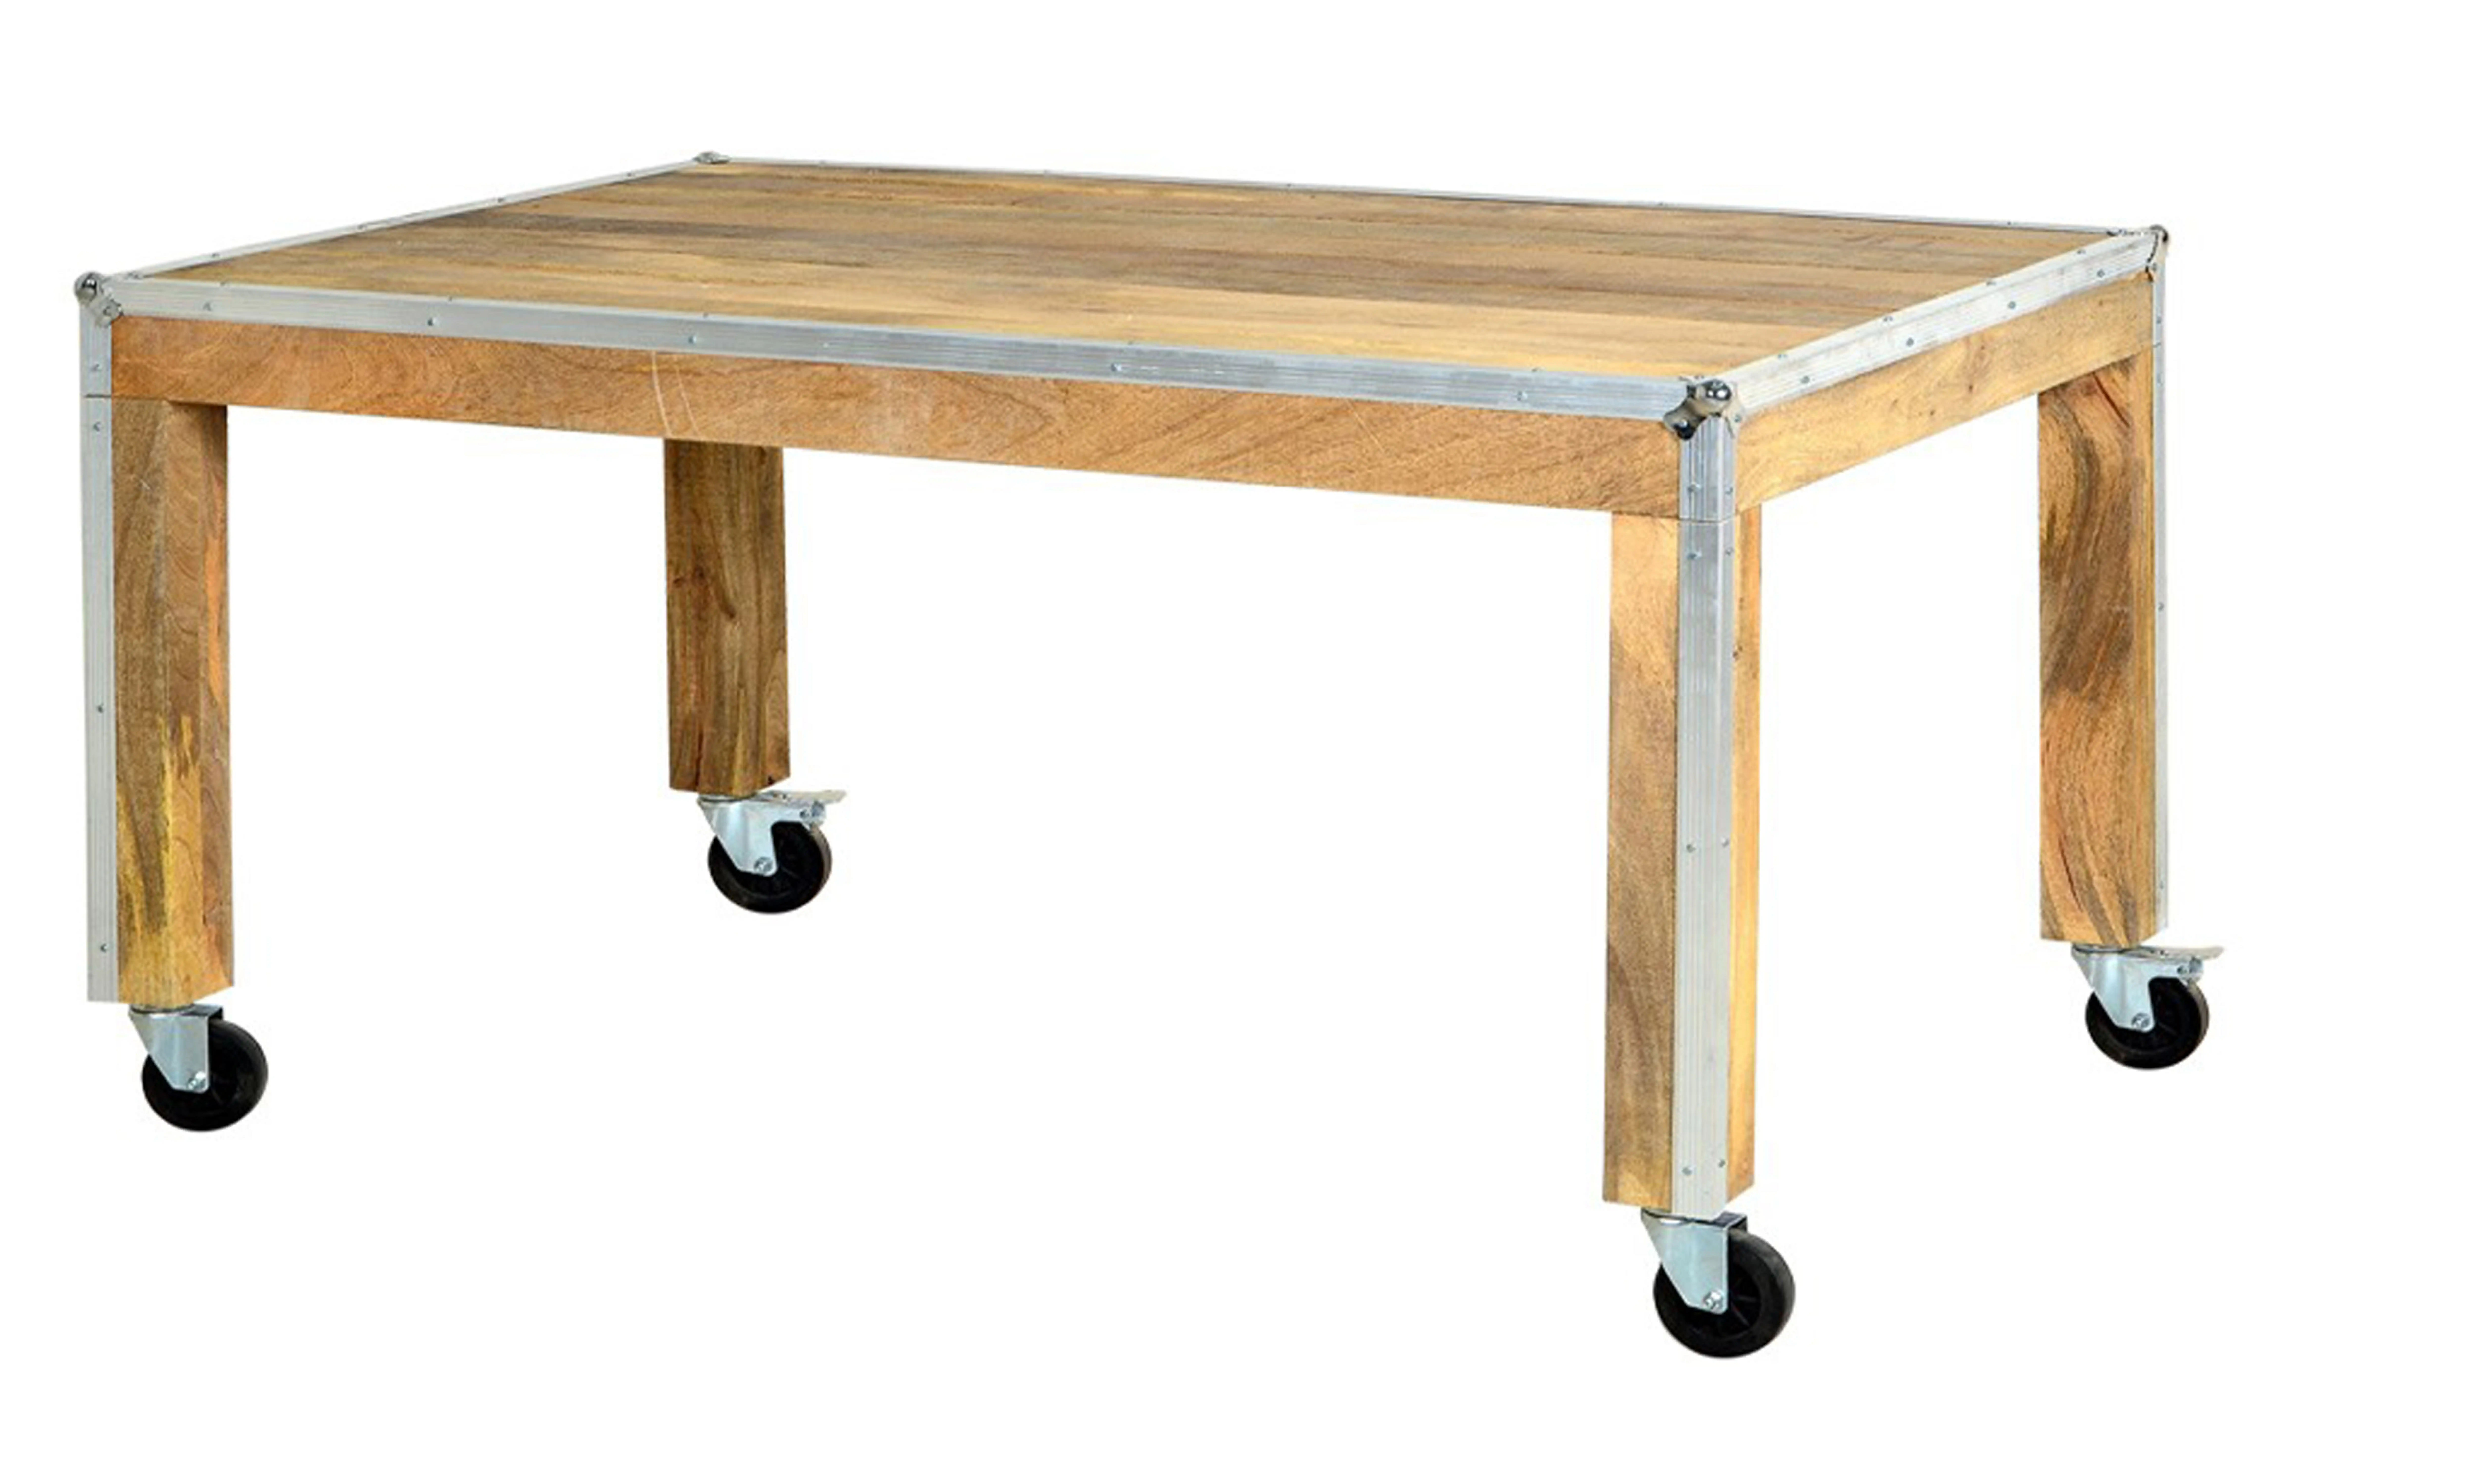 Roadie Chic Reclaimed Dining Table on Wheels (Knock Down) - popular handicrafts